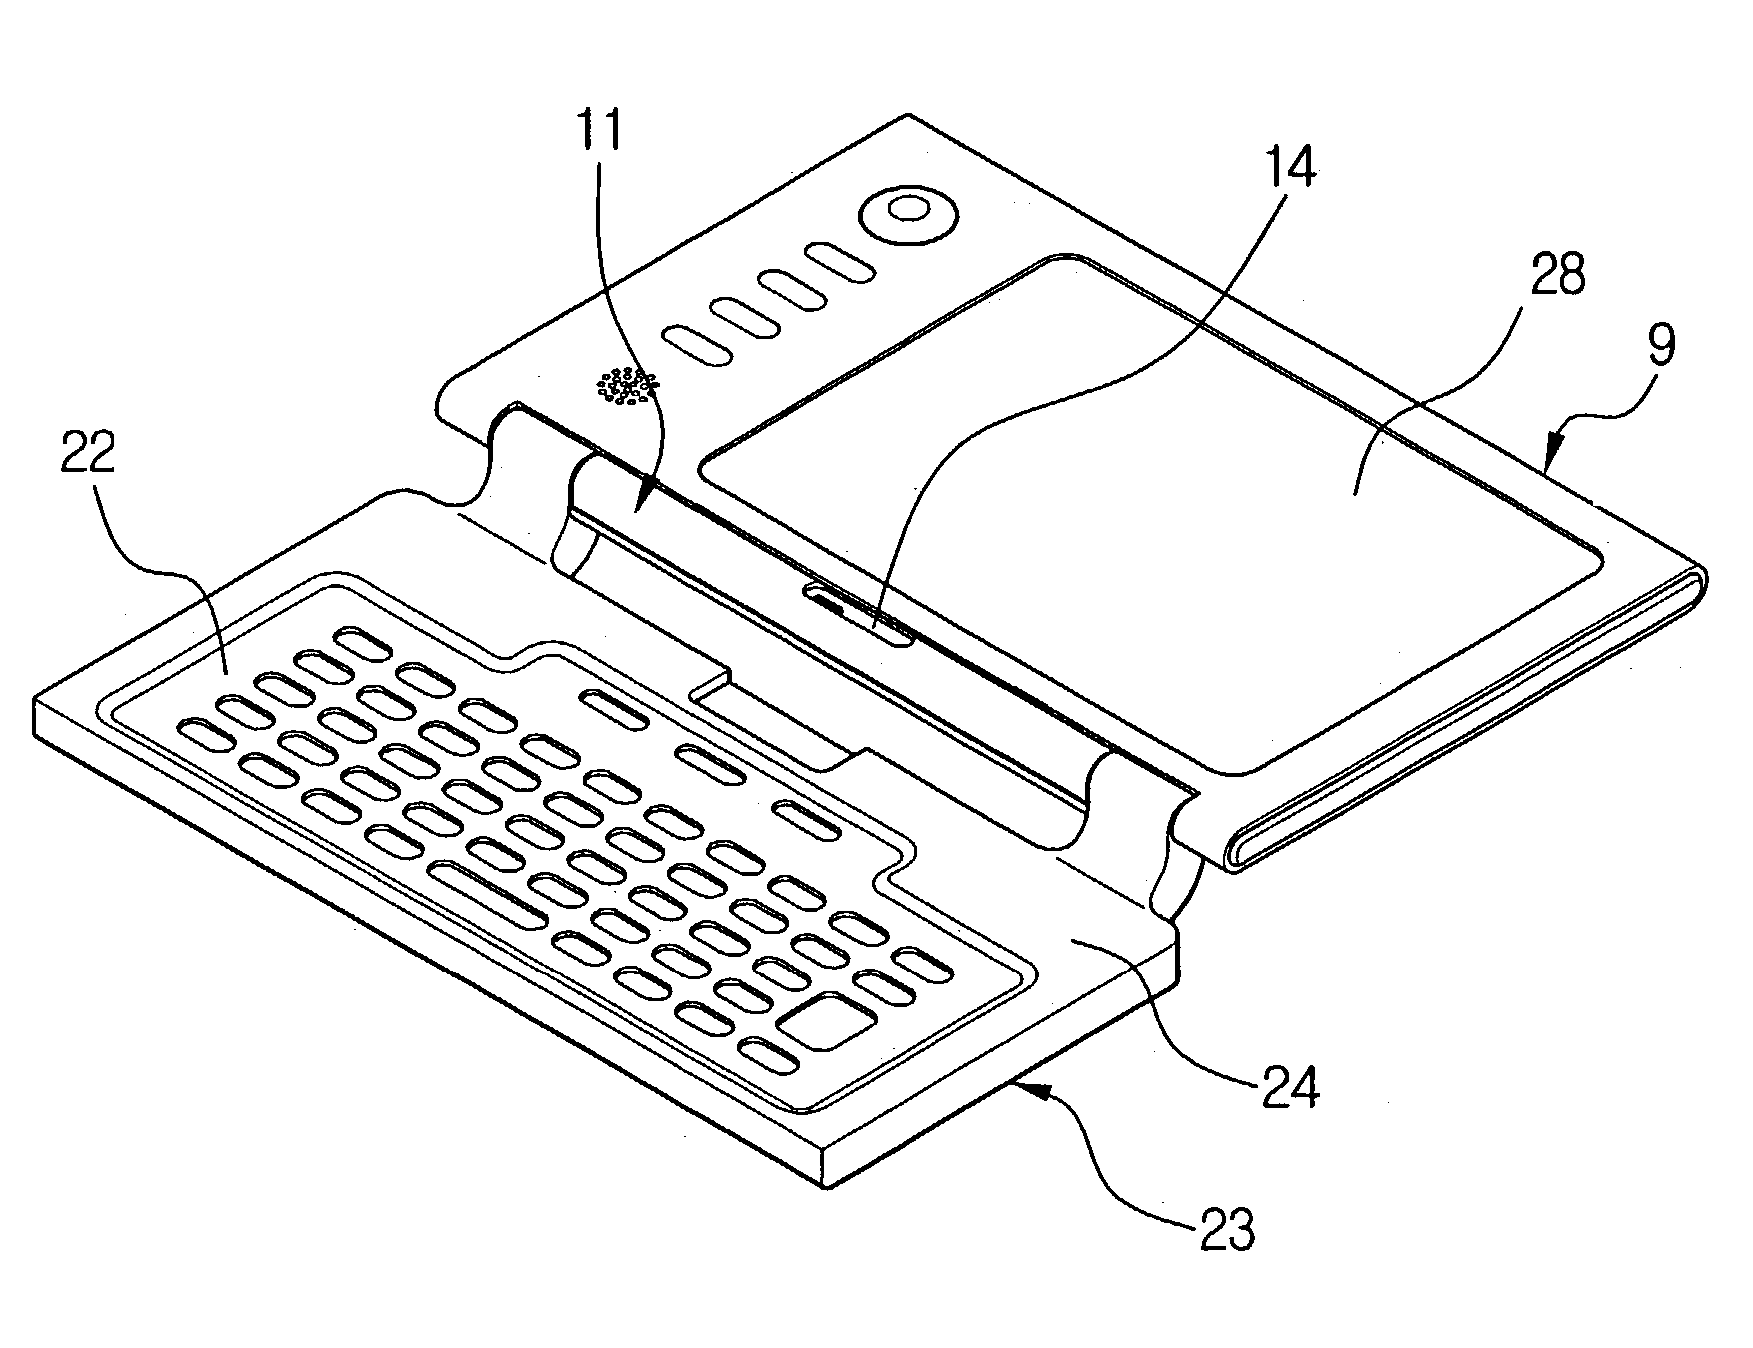 Keyboard of a personal digital assistant